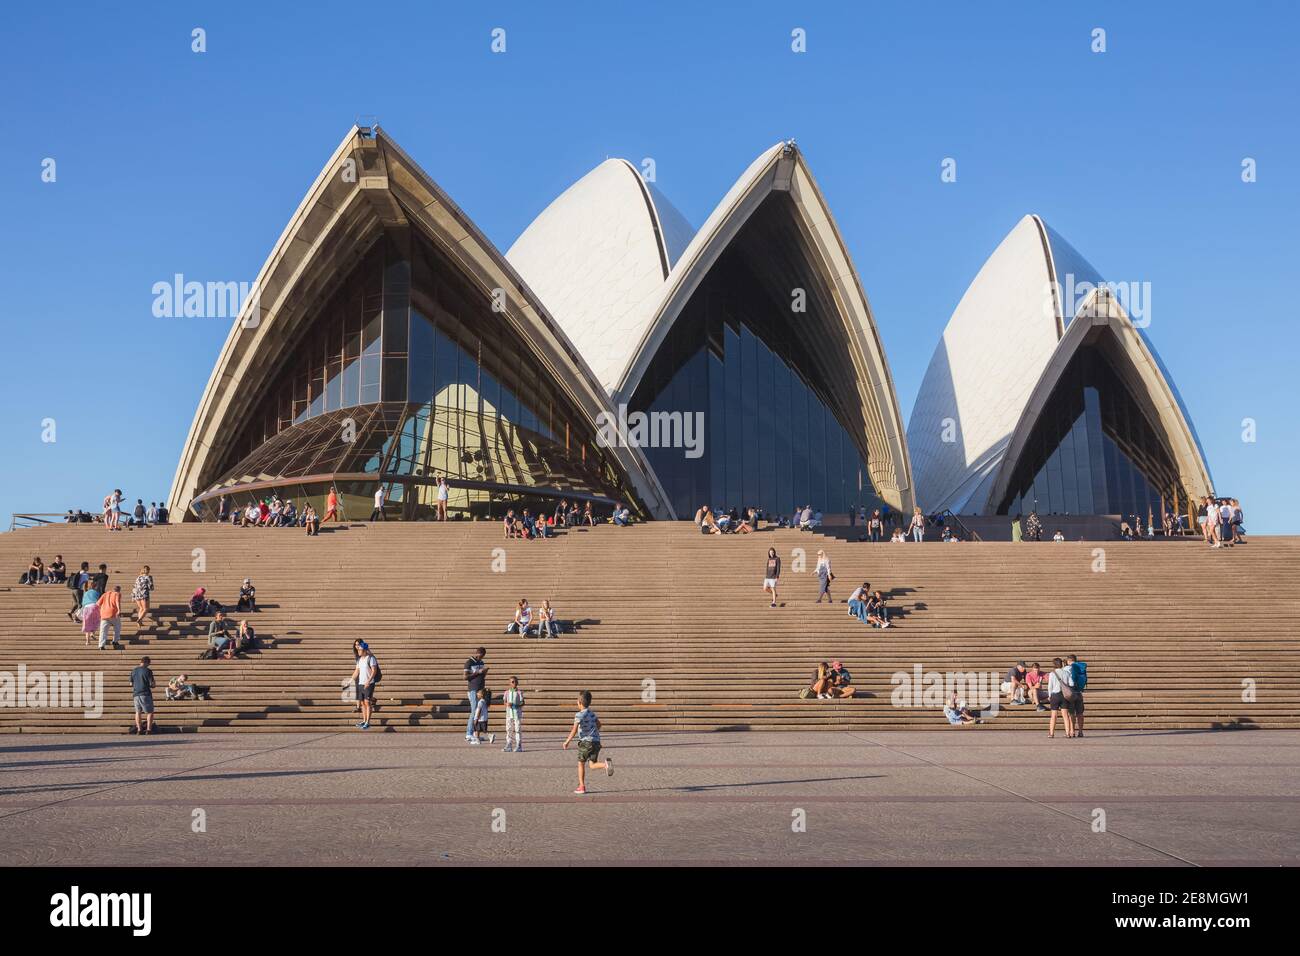 Sydney, Australia - January 4 2018: Tourists and visitors gather on the steps in front of the unique and modern architecture of the iconic Sydney Oper Stock Photo